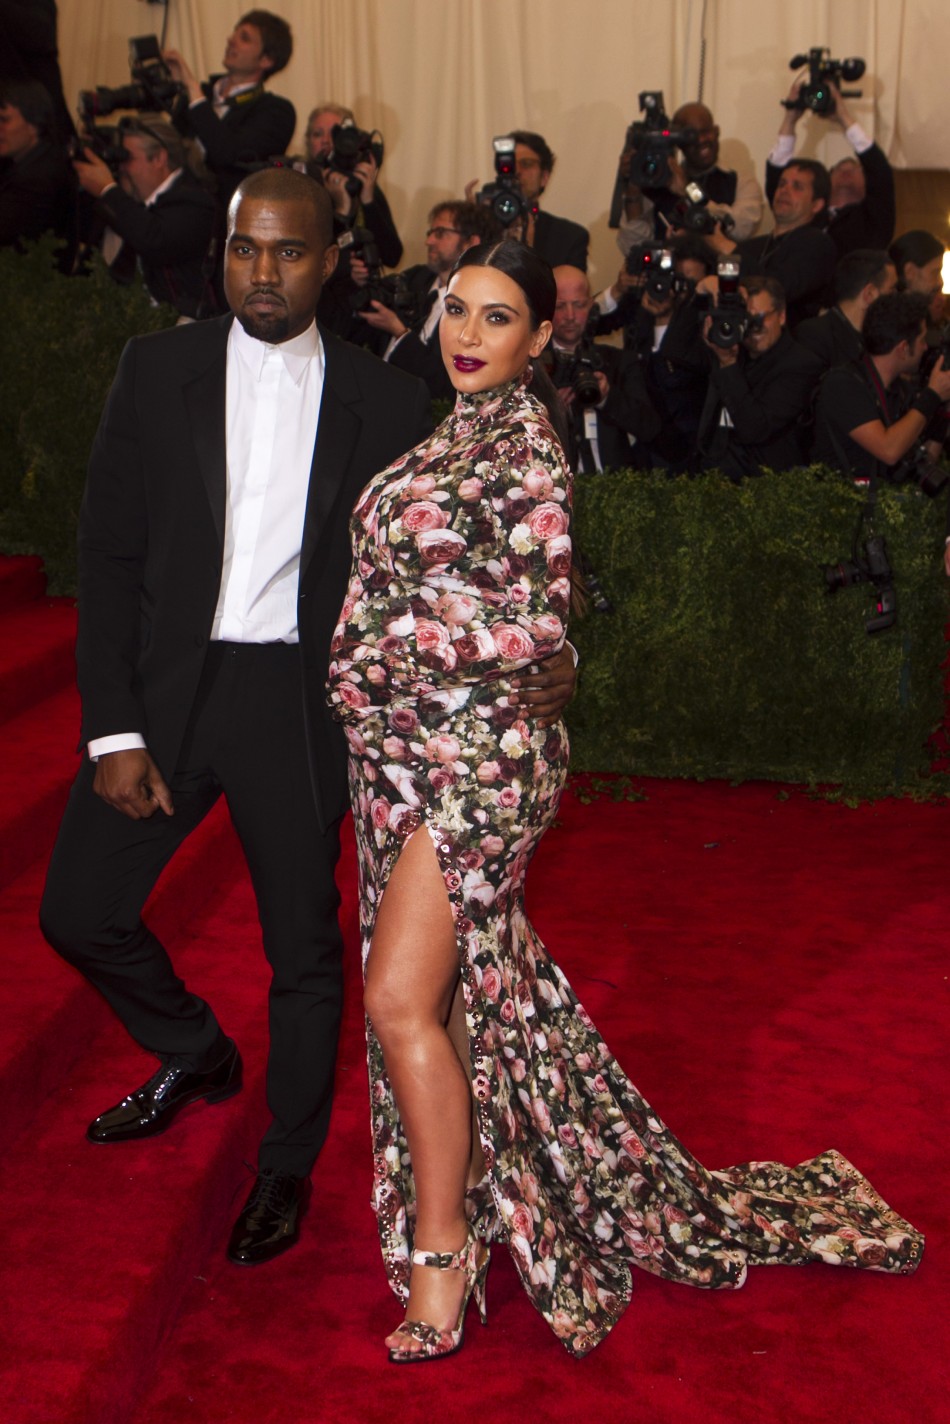 Singer Kanye West and reality television actress Kim Kardashian arrive at the Metropolitan Museum of Art Costume Institute Benefit celebrating the opening of PUNK Chaos to Couture in New York